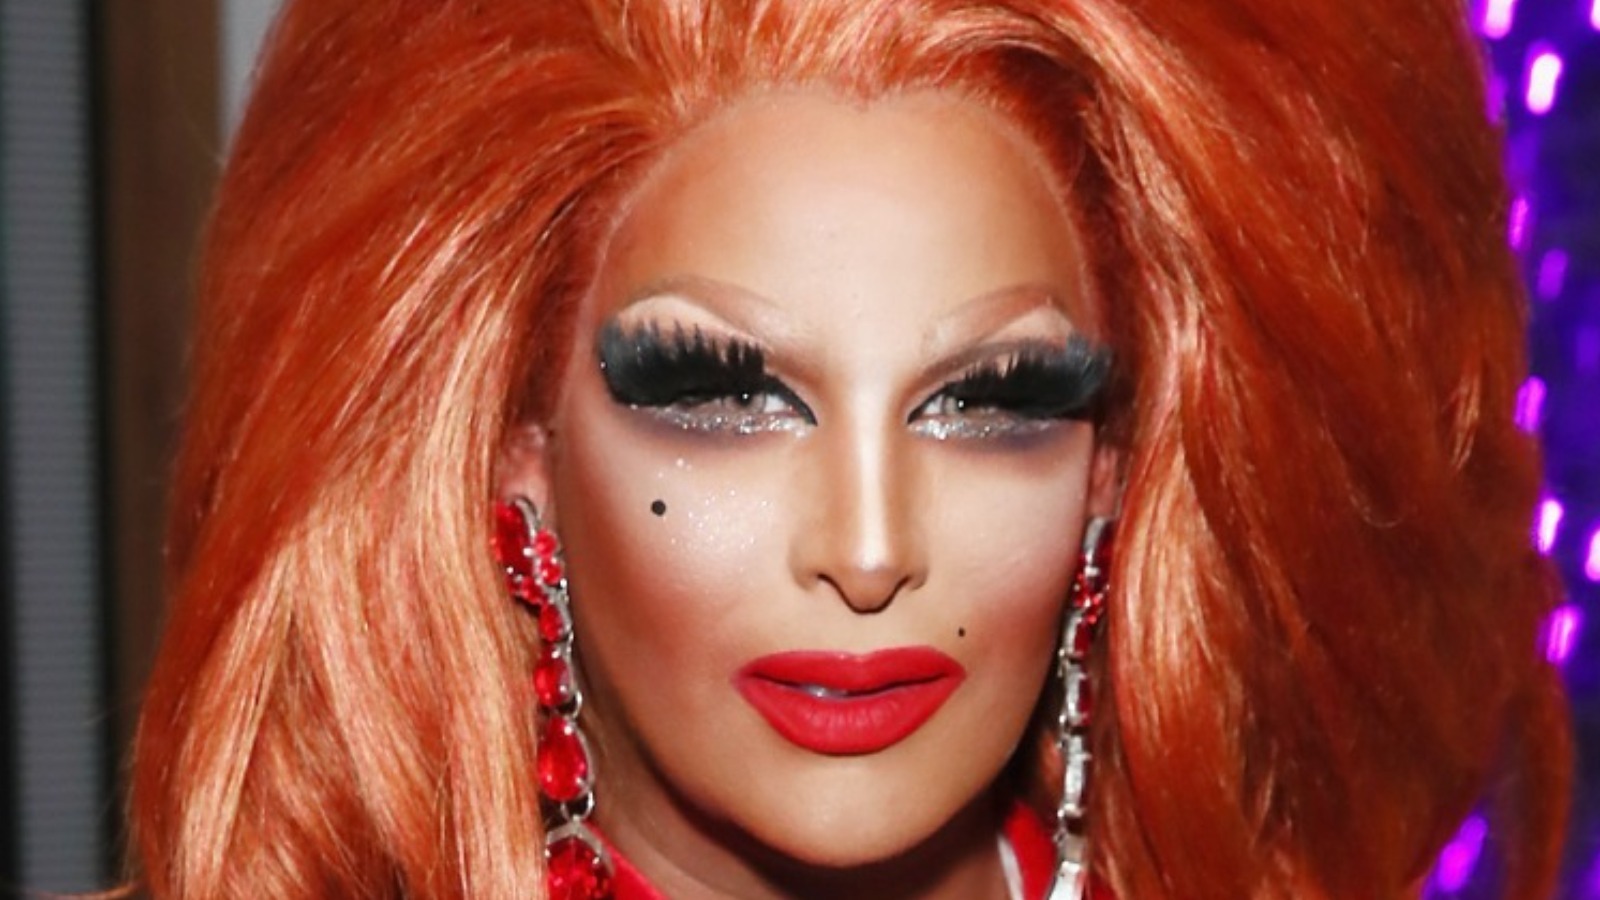 What Happened To Roxxxy Andrews After RuPaul's Drag Race?